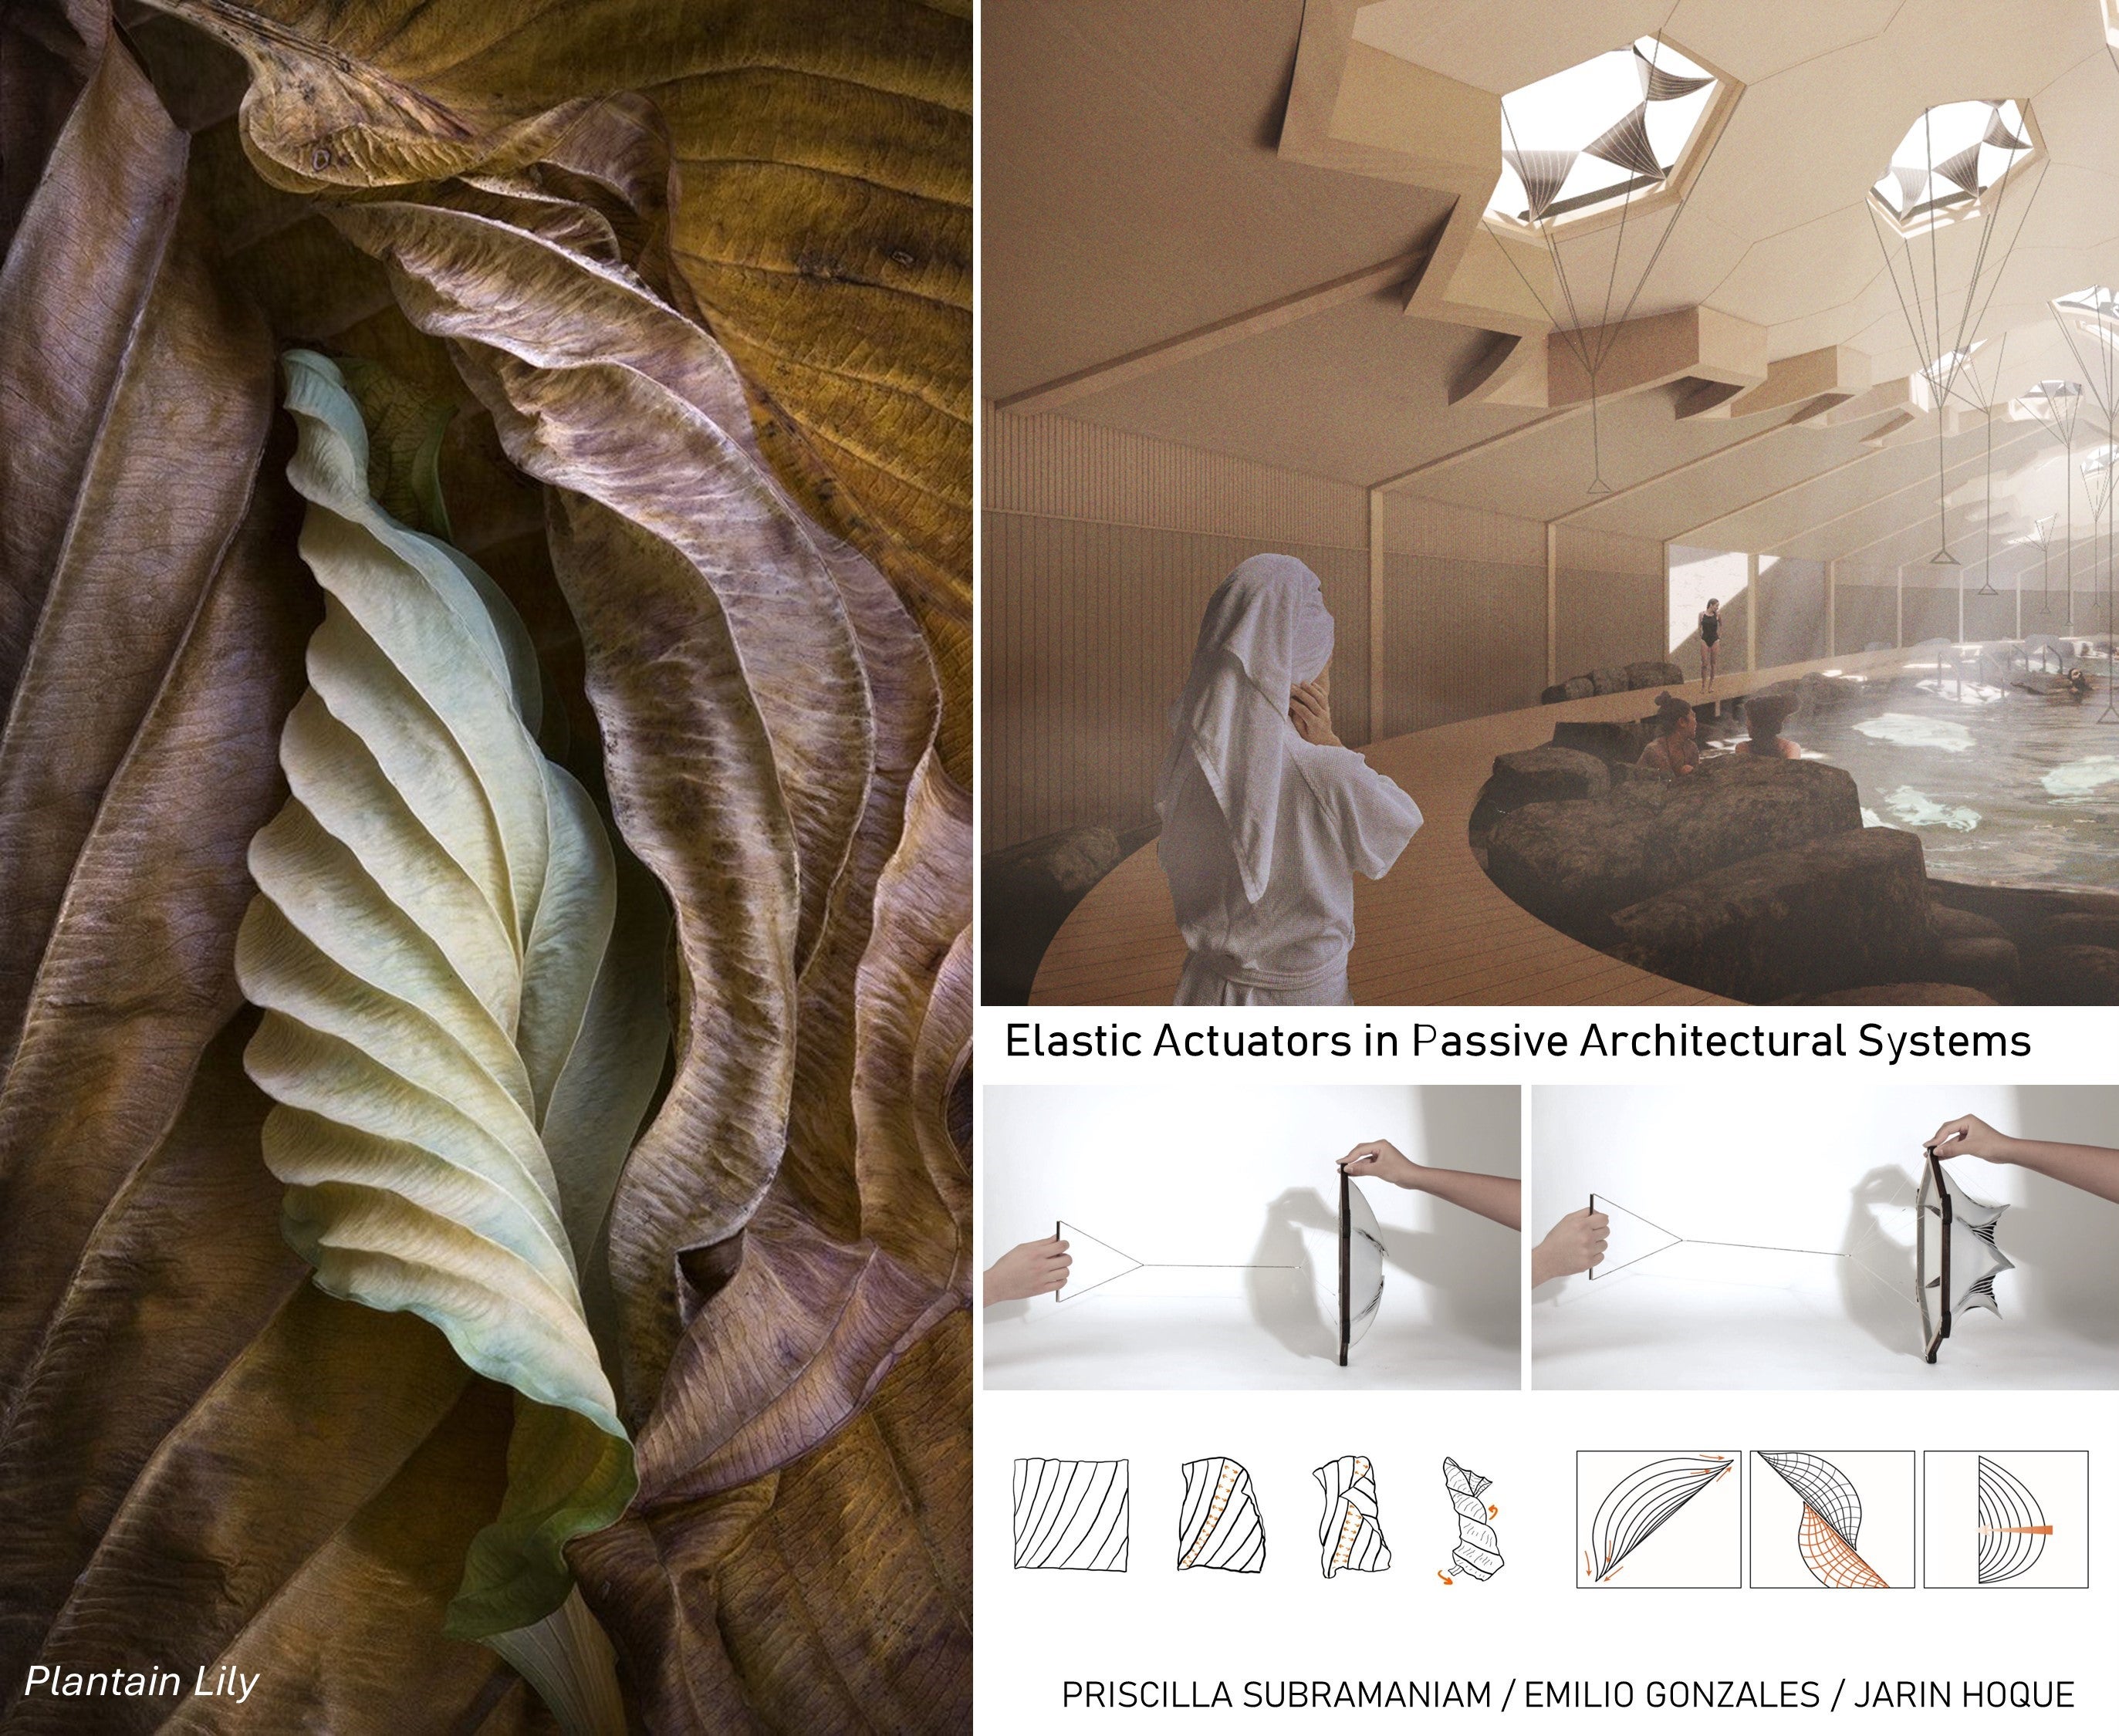 Architectural research project of a Climate responsive design based on a plantain lily